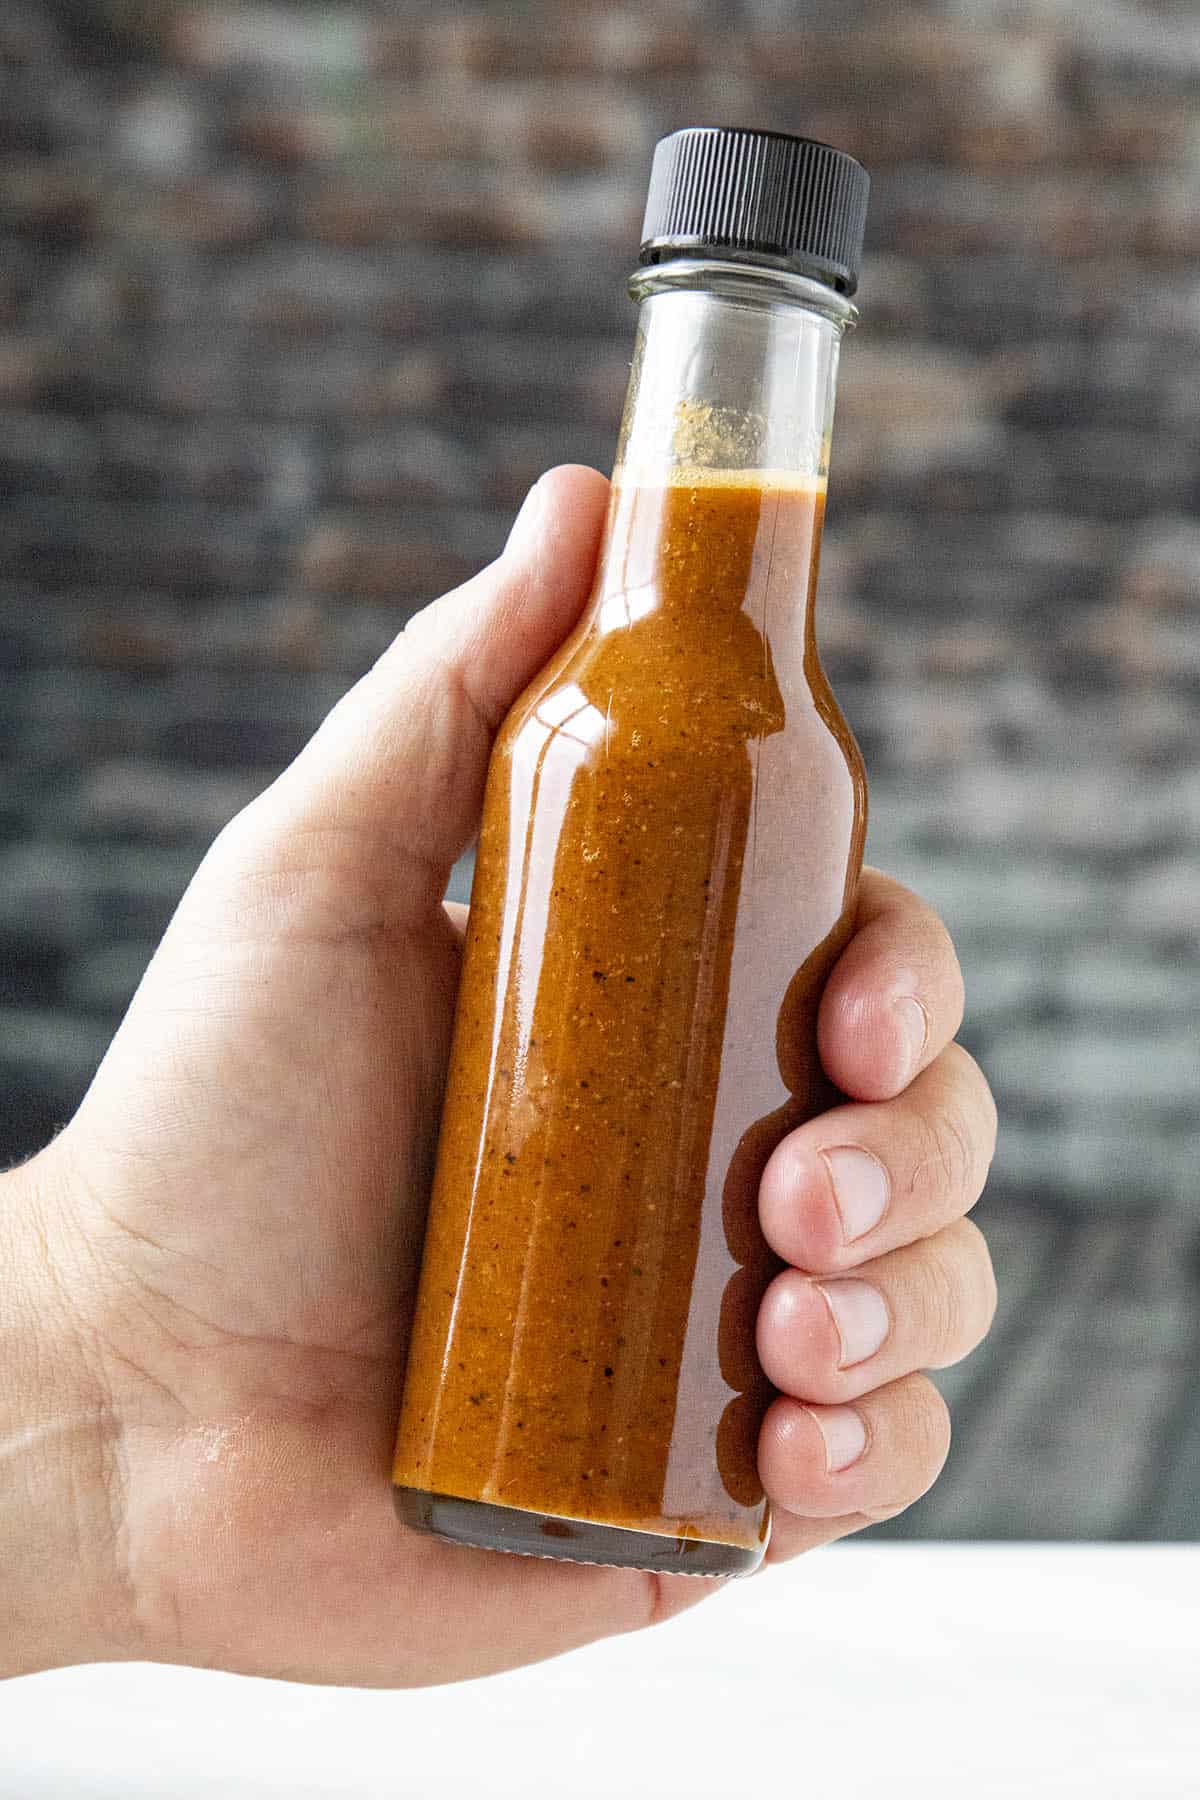 A bottle of Carolina Reaper Hot Sauce in my hand, ready to spice things up!